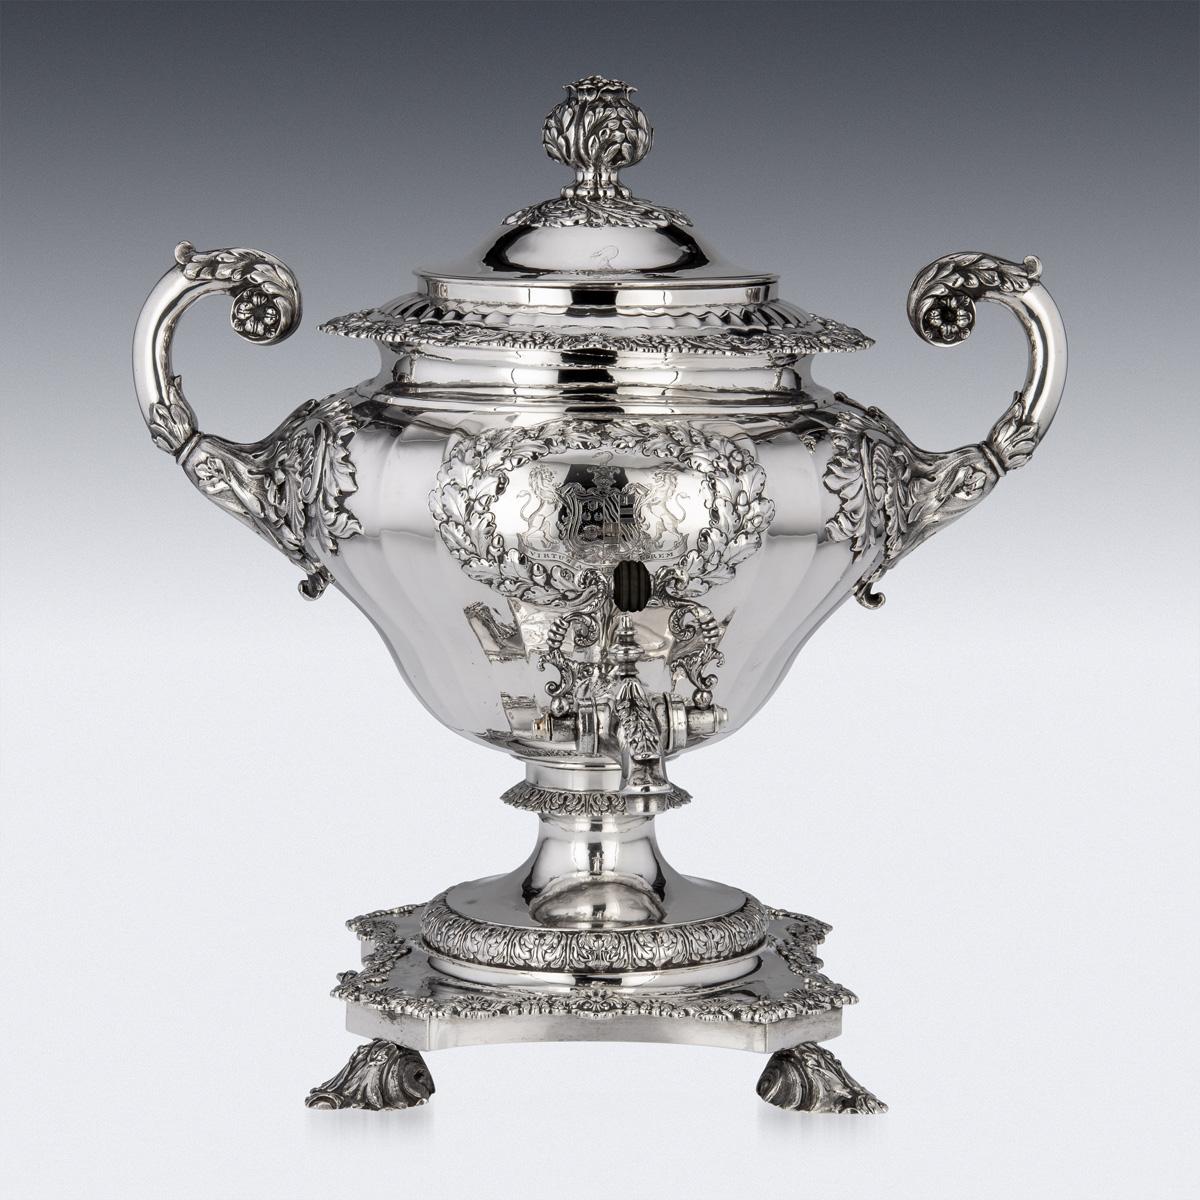 19th Century Georgian silver hot water samovar, inverted pear shaped on a shaped square base, cast scroll feet, body profusely chased in relief with flowers, scrolls and acanthus leaves, applied with large twin leaf caped c-shaped handles, a hot